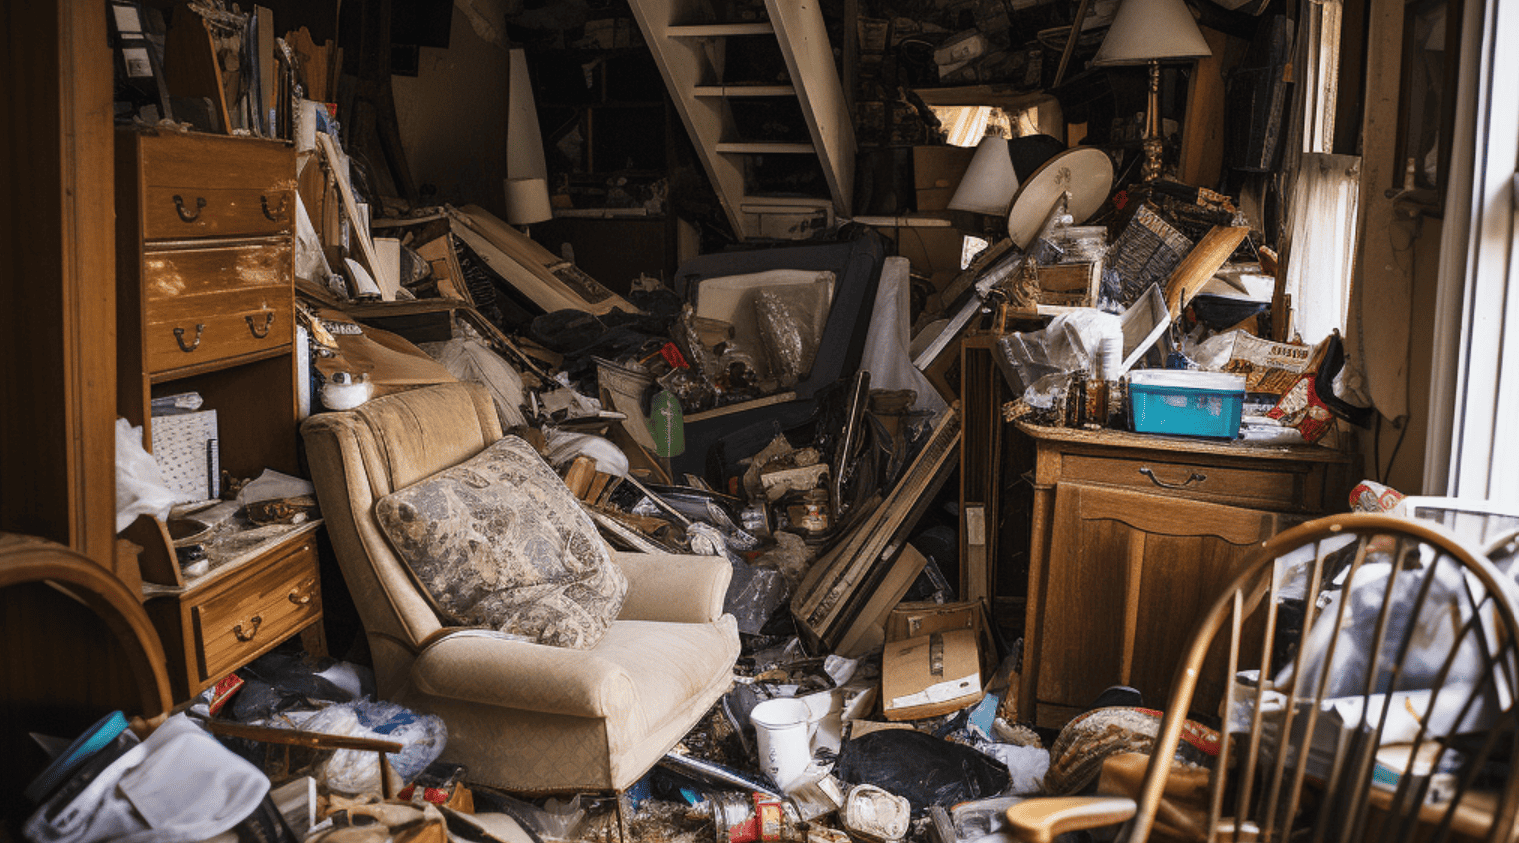 hoarding cleanup costs in louisville kentucky